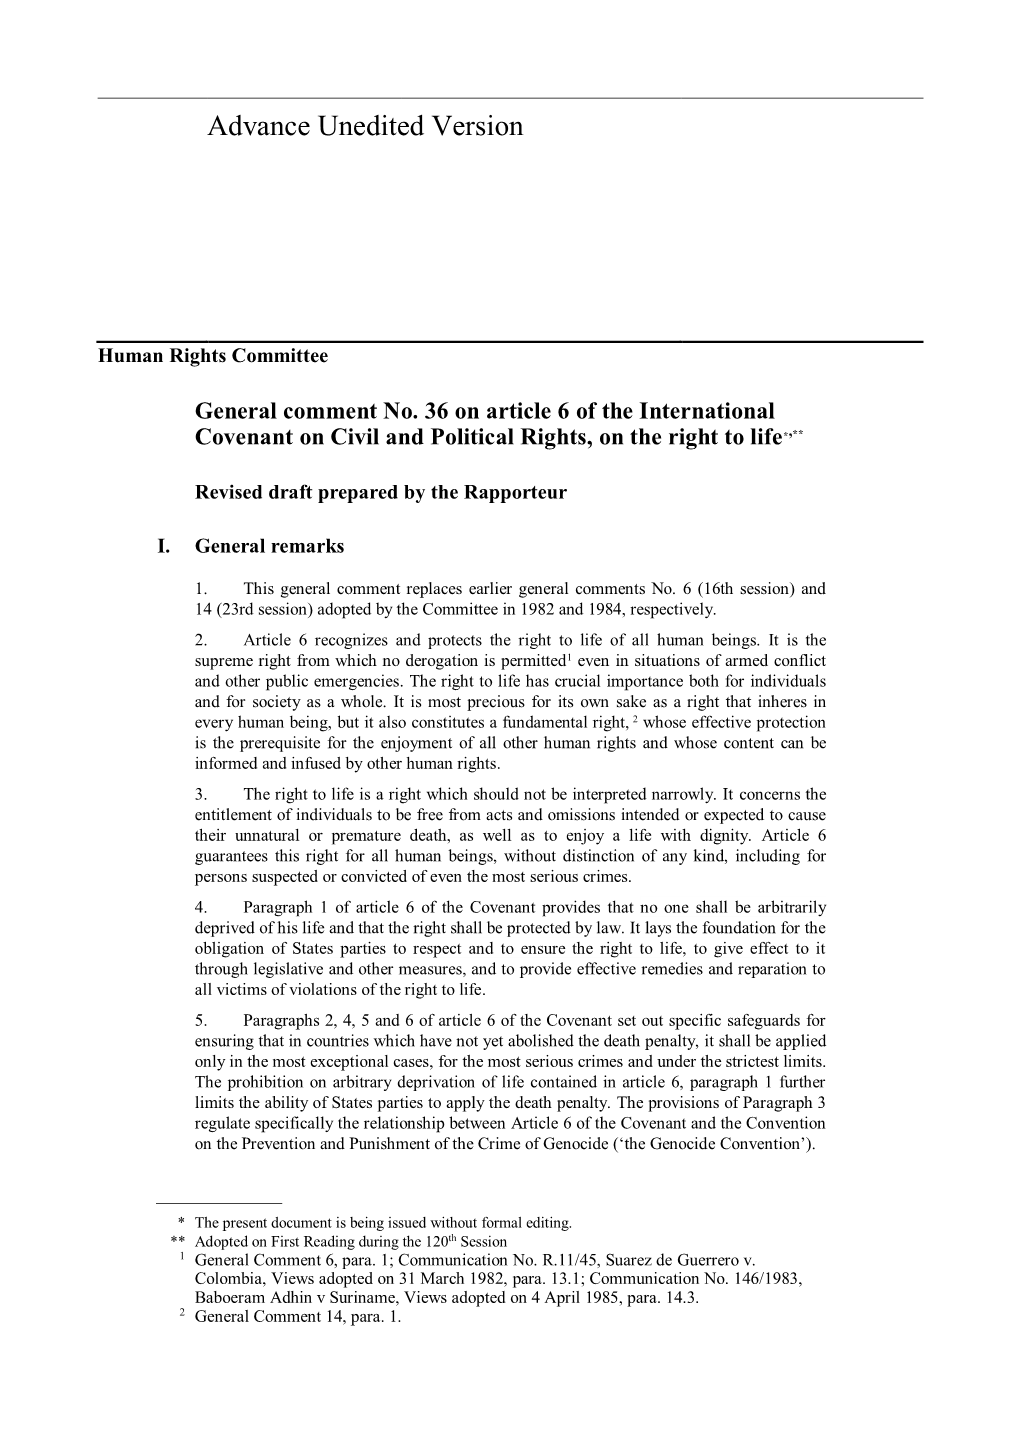 General Comment No. 36 on Article 6 of the International Covenant on Civil and Political Rights, on the Right to Life*,**